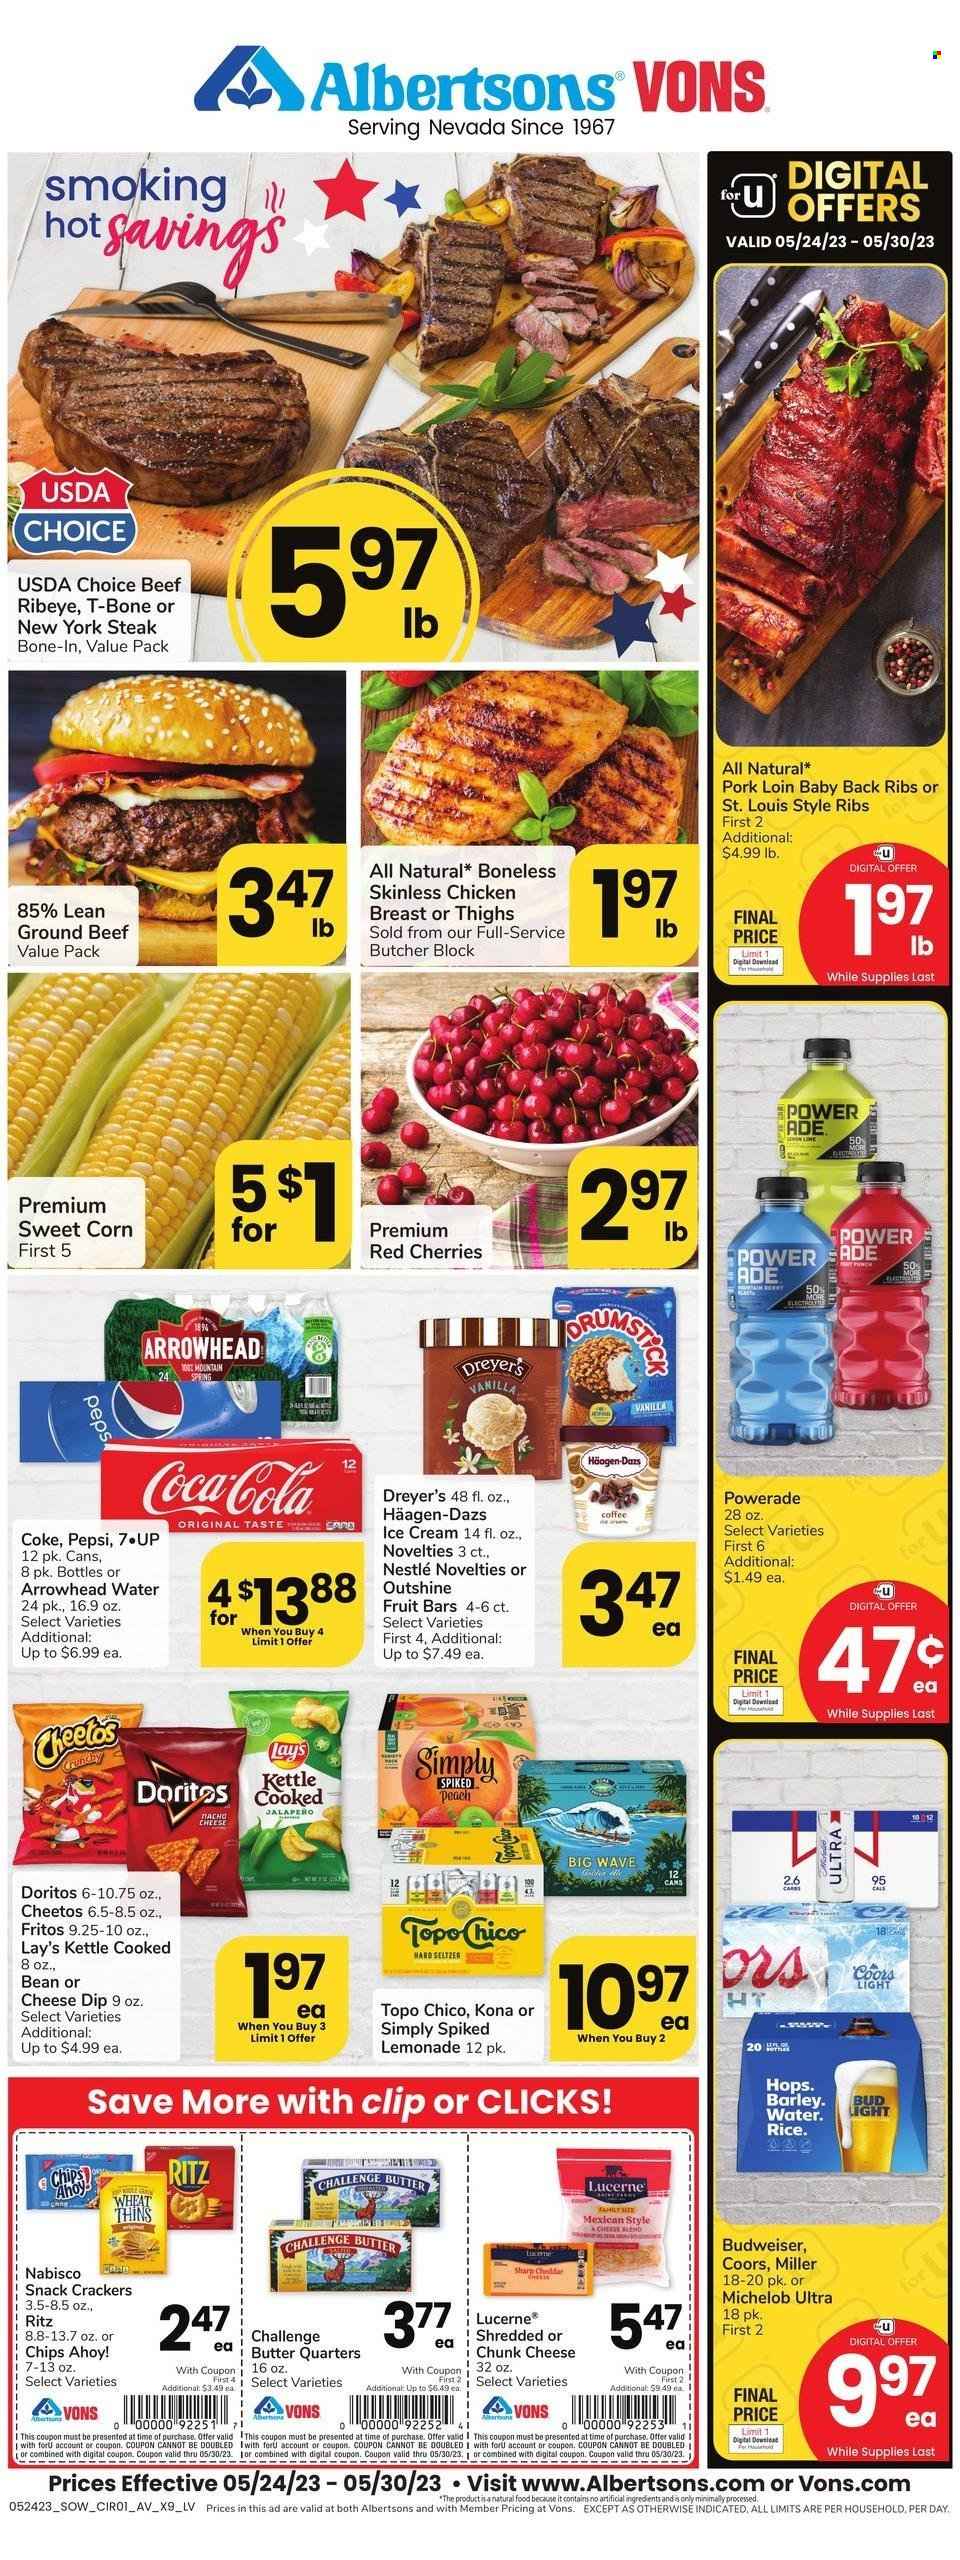 thumbnail - Vons Flyer - 05/24/2023 - 05/30/2023 - Sales products - corn, jalapeño, cherries, chicken breasts, chicken, beef meat, ground beef, t-bone steak, steak, ribs, pork loin, pork meat, pork ribs, pork back ribs, snack, shredded cheese, cheese, chunk cheese, Häagen-Dazs, fruit bar, Nestlé, crackers, Chips Ahoy!, RITZ, Nabisco, Doritos, Fritos, Cheetos, Lay’s, Thins, salty snack, Coca-Cola, lemonade, Powerade, Pepsi, energy drink, soft drink, Coke, water, Hard Seltzer, Bud Light, Topo Chico, WAVE, Budweiser, Coors, Michelob. Page 1.